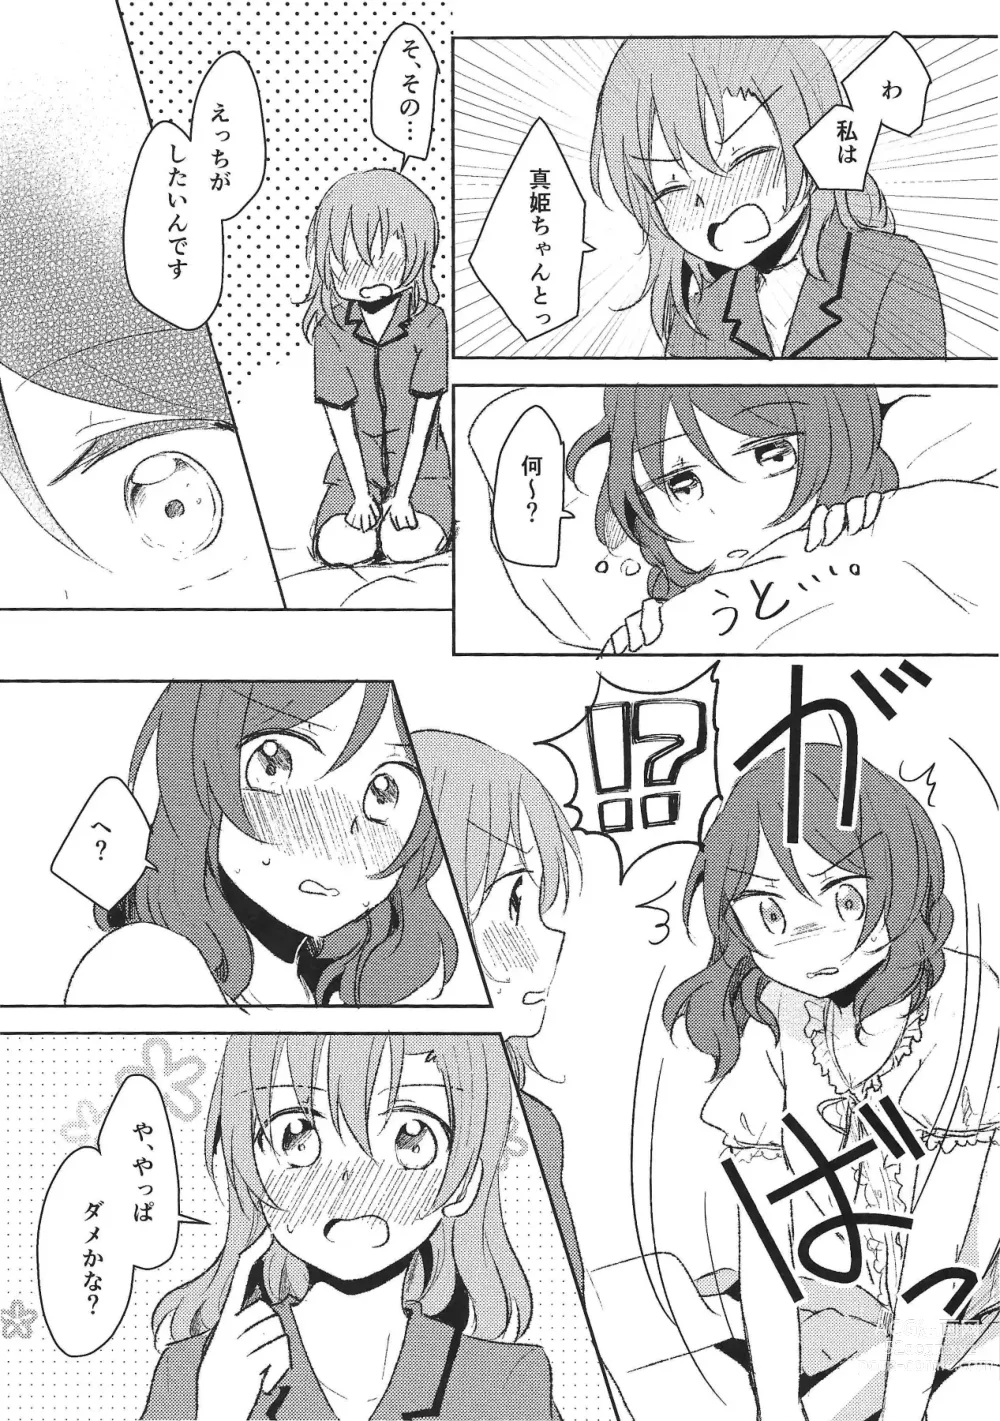 Page 6 of doujinshi LOVE STEP